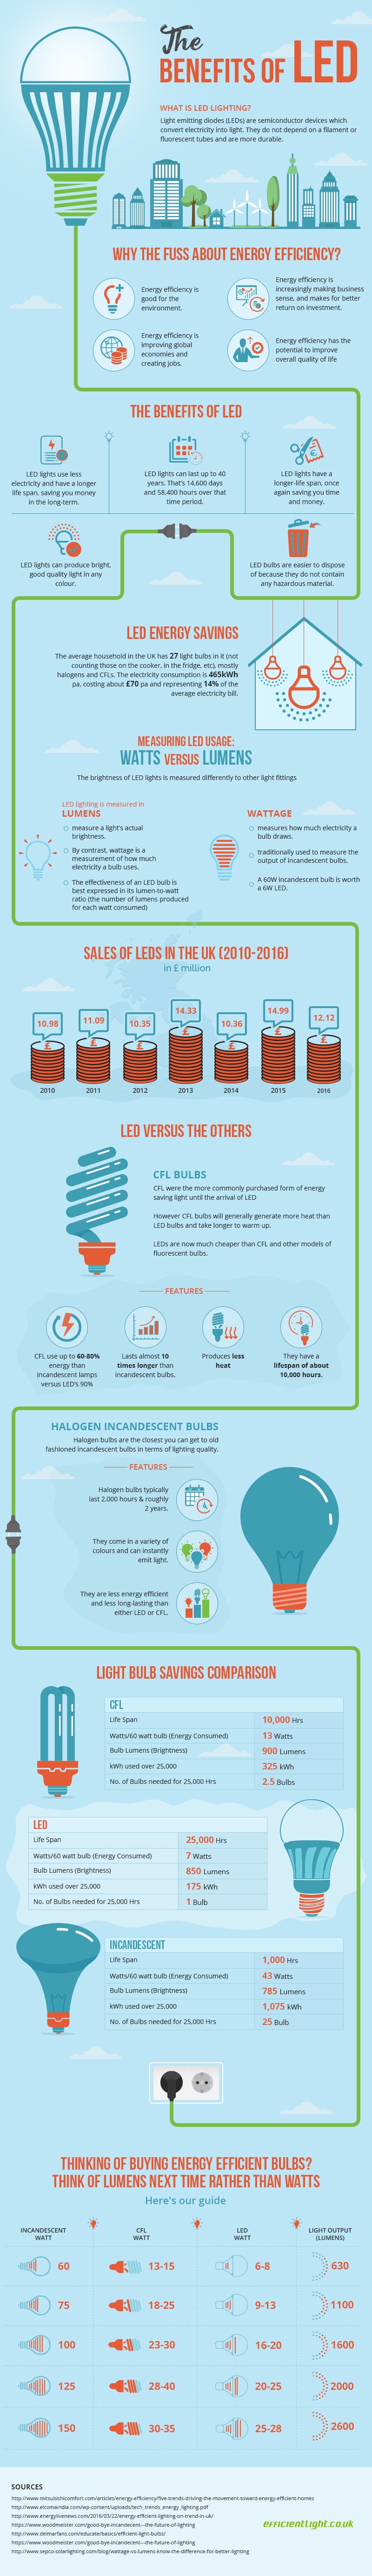 LED Infographic